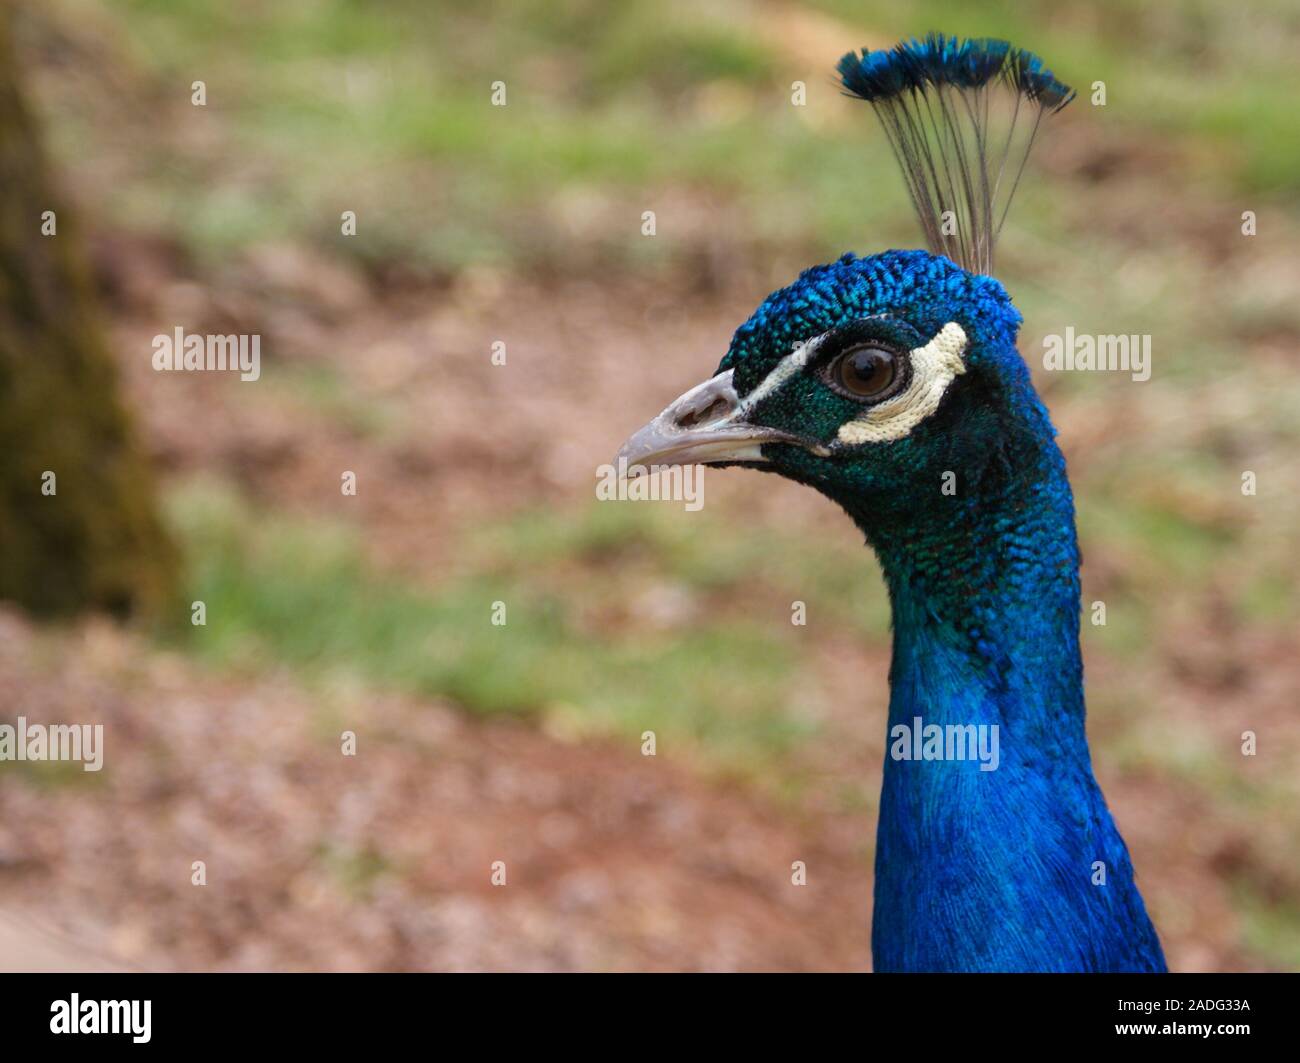 Proud bird shows his beautiful headdress and looks a little bit confused Stock Photo